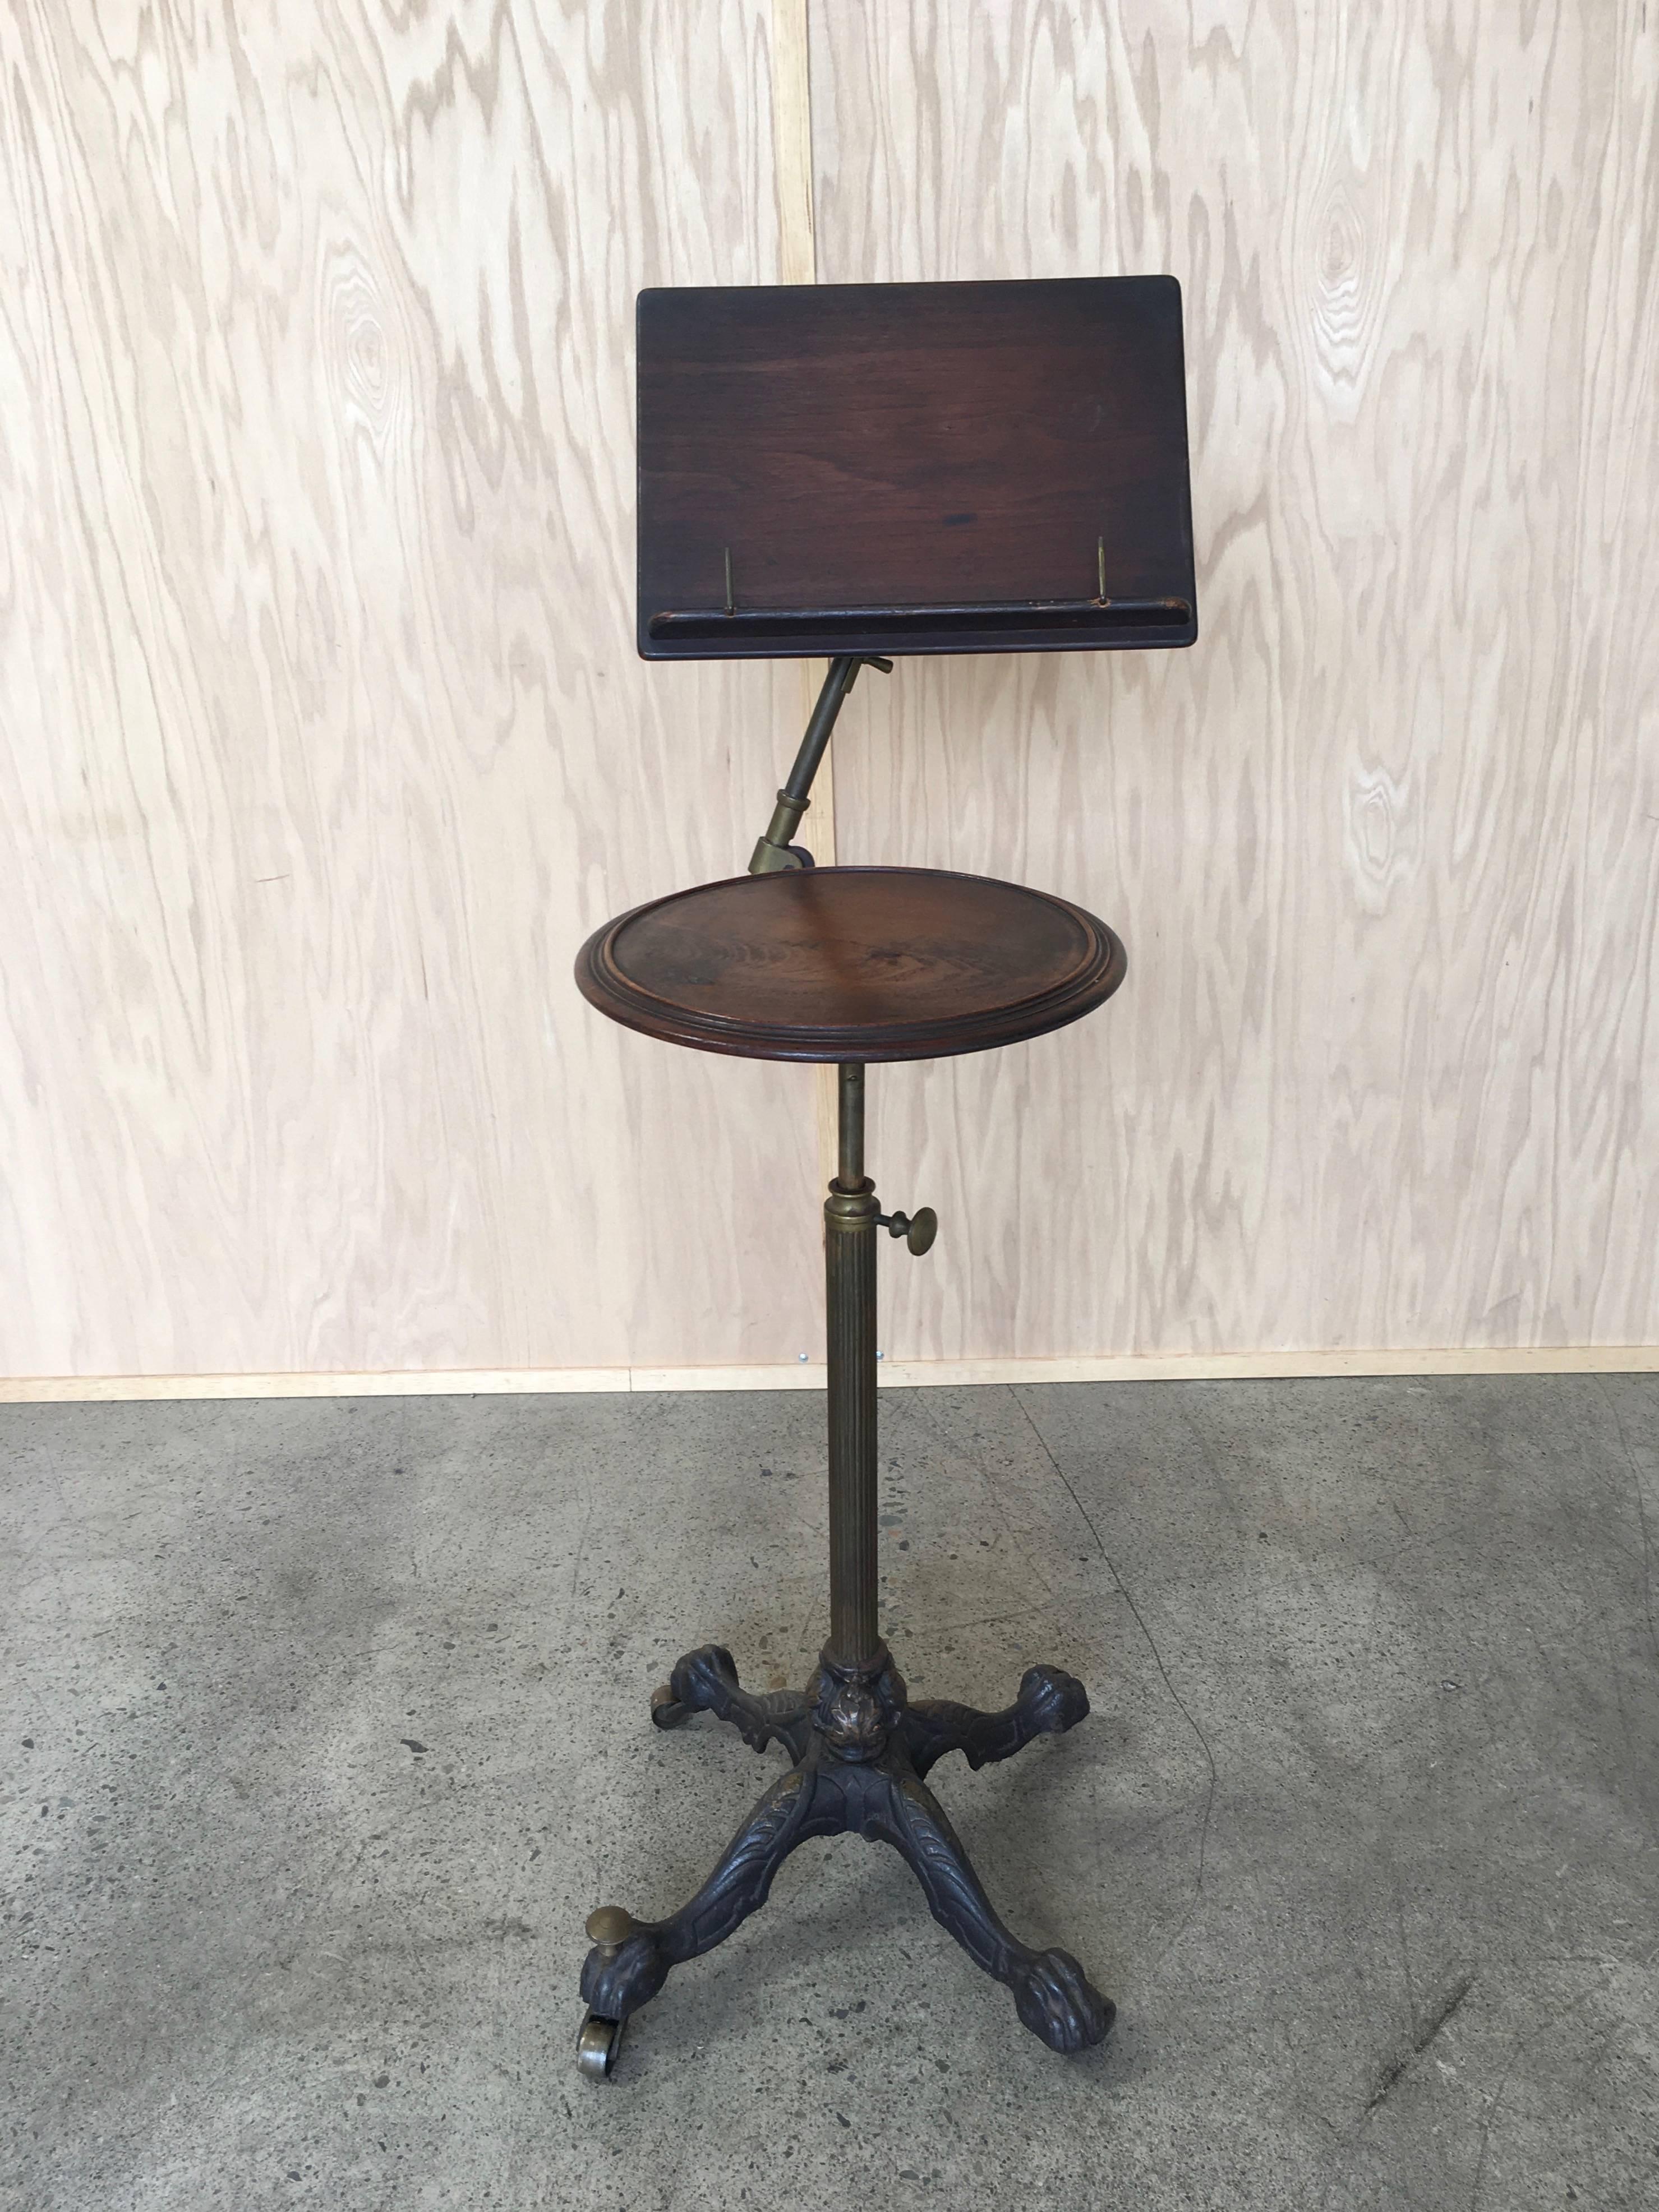 Antique
19th century articulated music candle stand 
Cast iron base with fluted brass column leading up to the mechanism 
for adjusting height of candle table and the music holder.